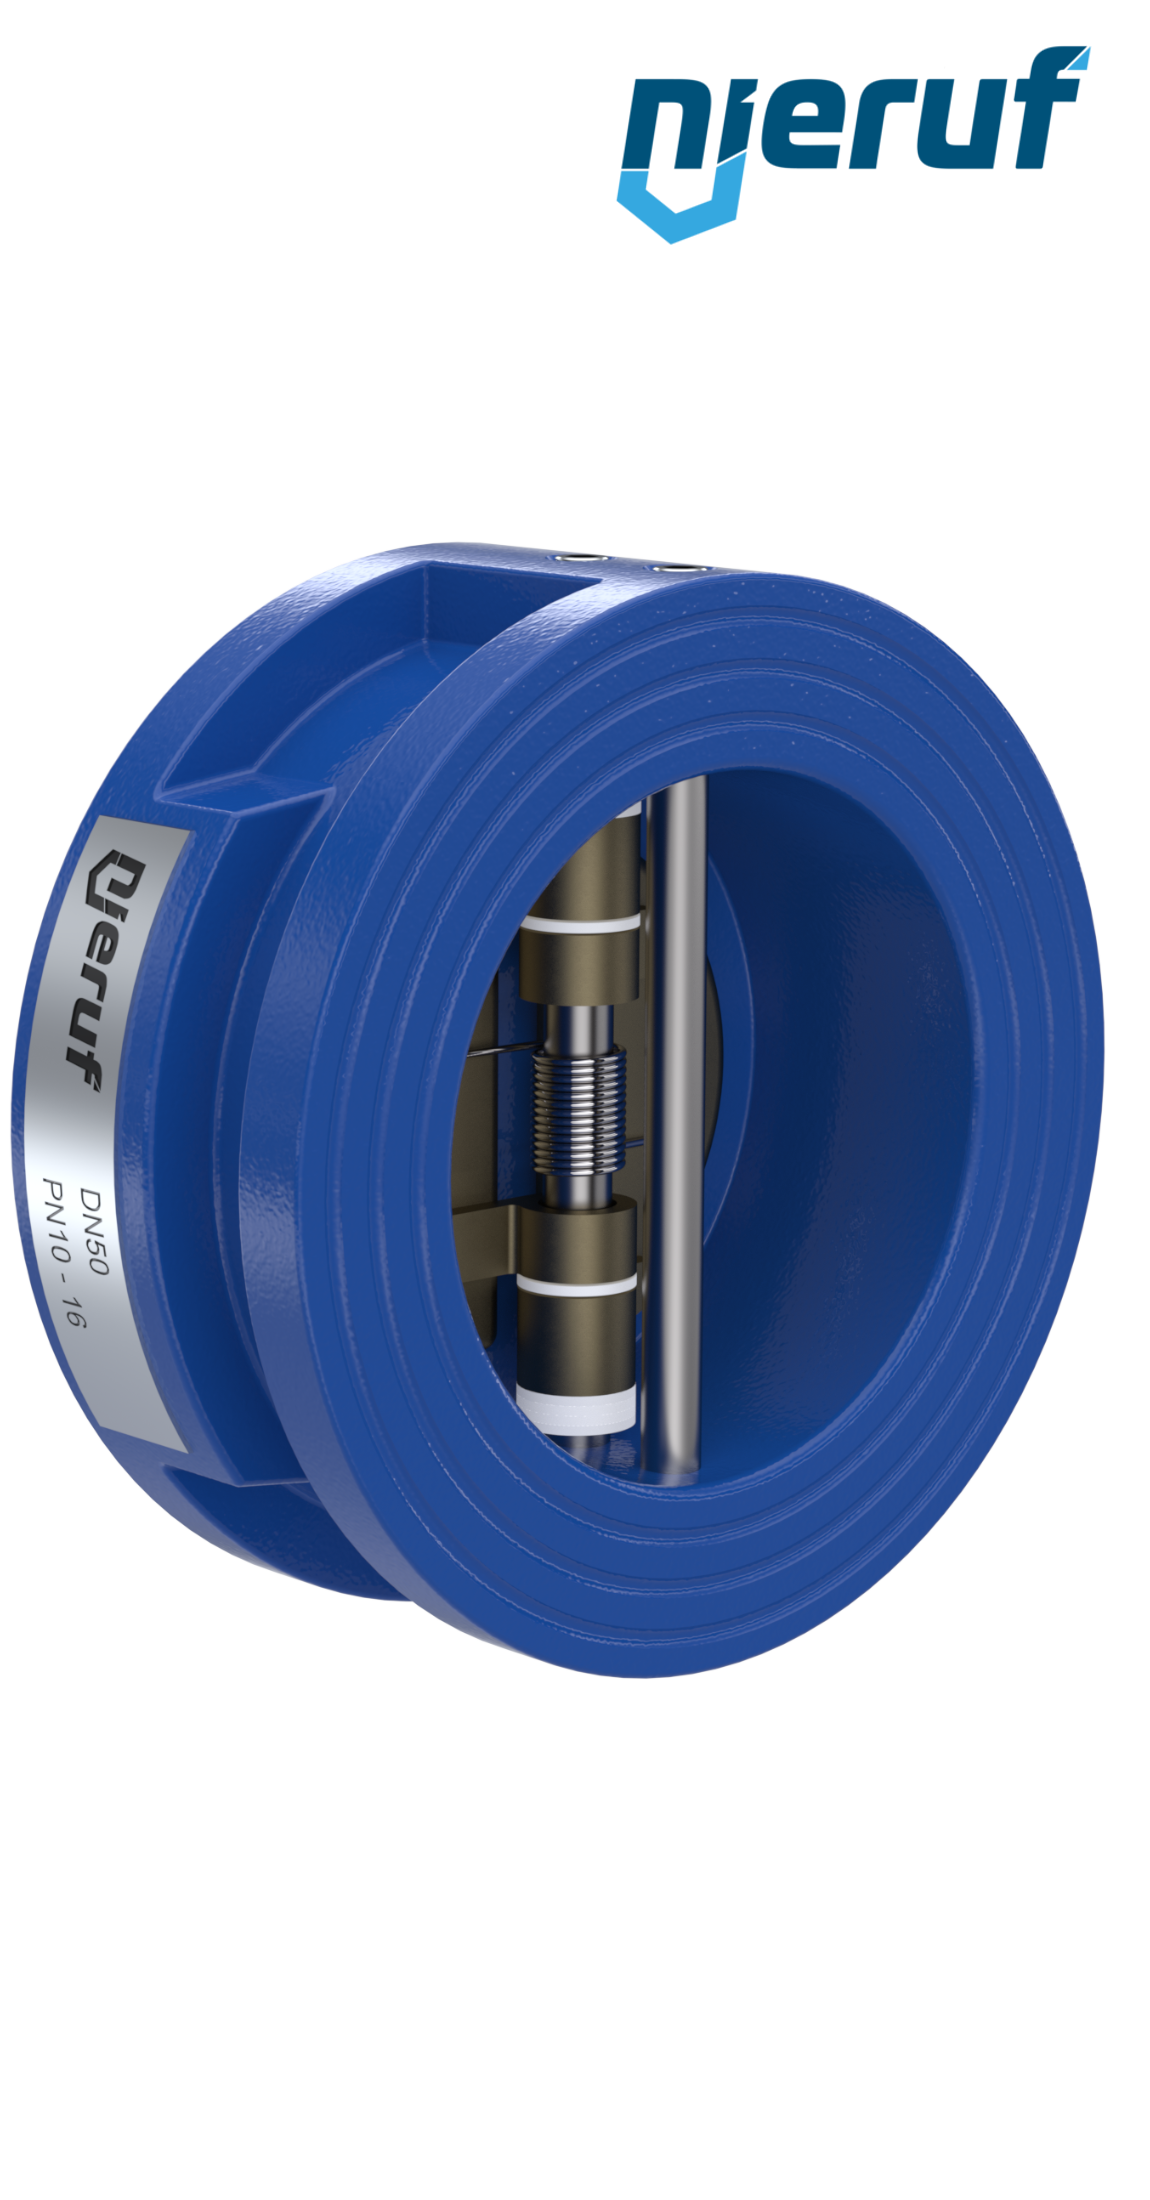 dual plate check valve DN50 DR04 GGG40 epoxyd plated blue 180µm EPDM